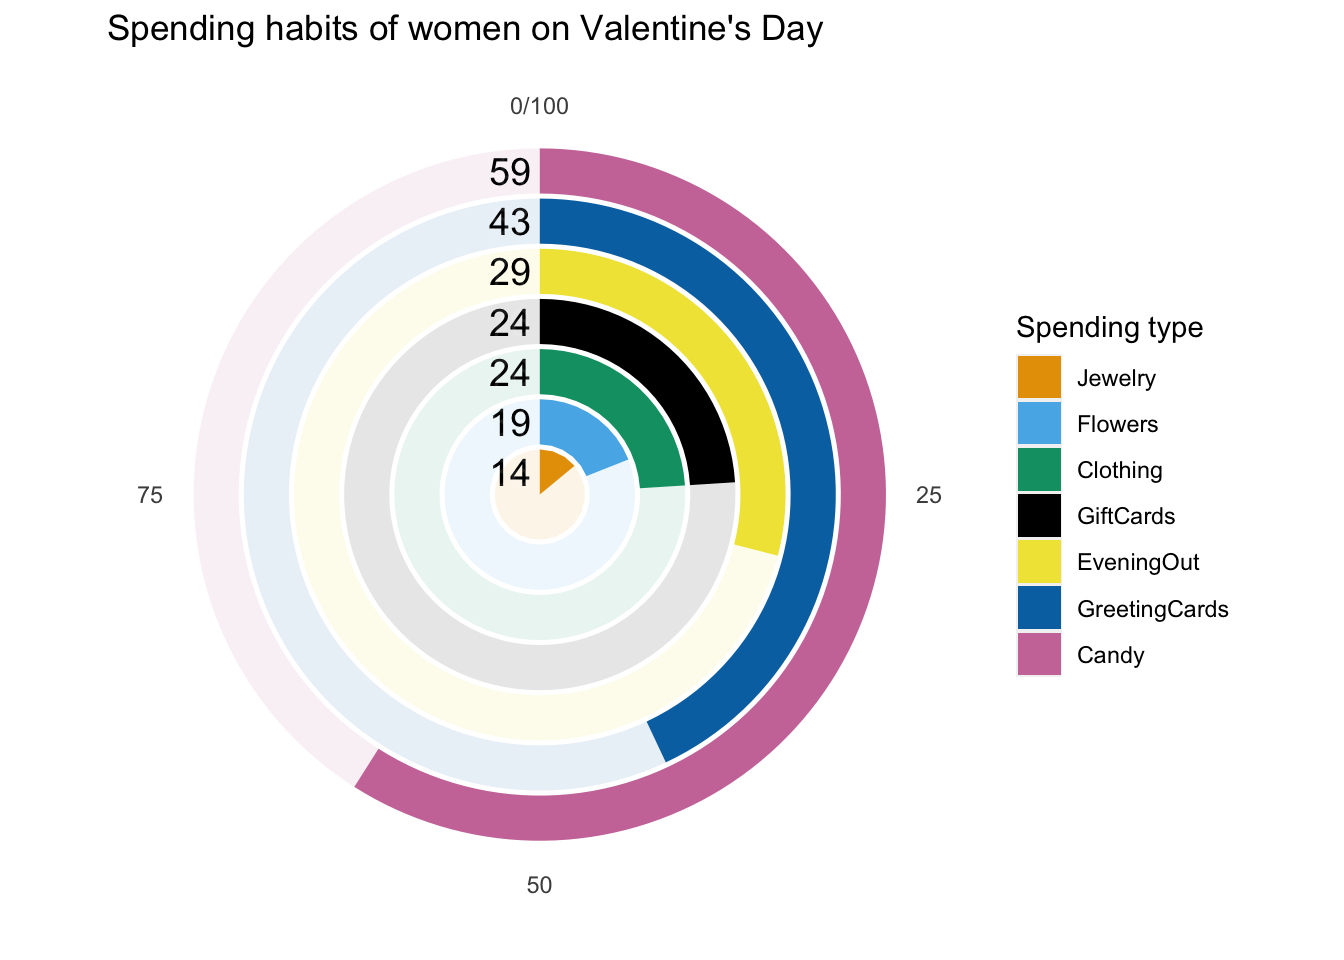 Donut plot describing spending habits of women on Valentine's Day.  Of those women who celebrate Valentine's Day, 59 percent spent money on candy, 43 percent spent money on greeting cards, 29 percent spent money on an evening out, 24 percent spent money on gift cards, 24 percent spent money on clothing, 19 percent spent money on flowers, and 14 percent spent money on jewelry.